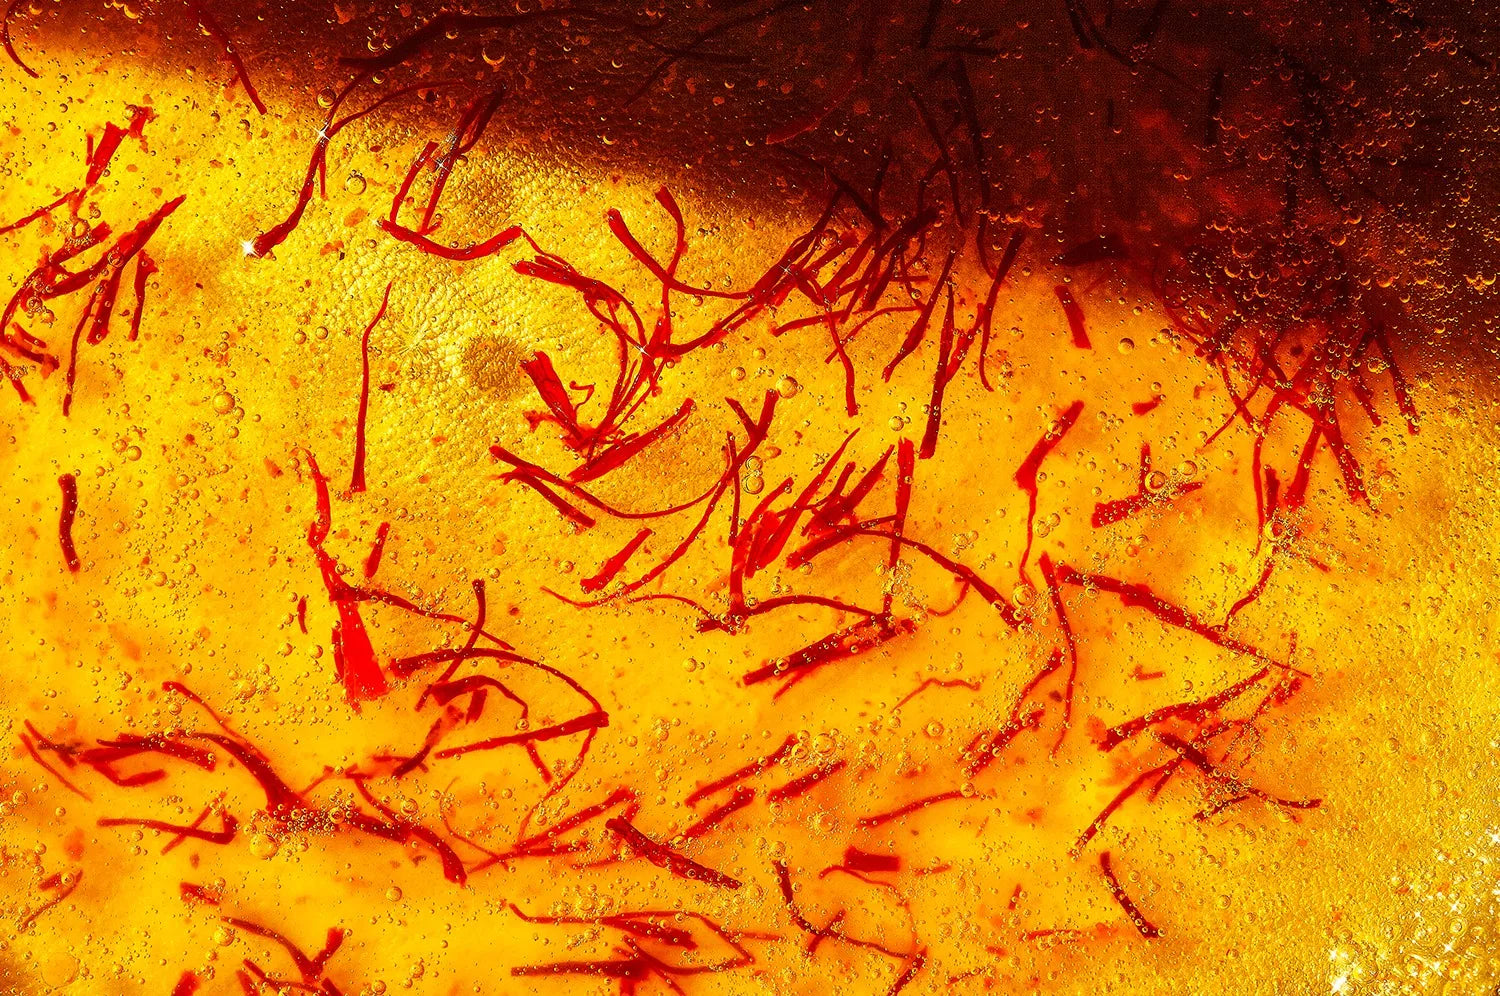 A close-up of saffron threads from The Fullest in a saffron latte beverage.